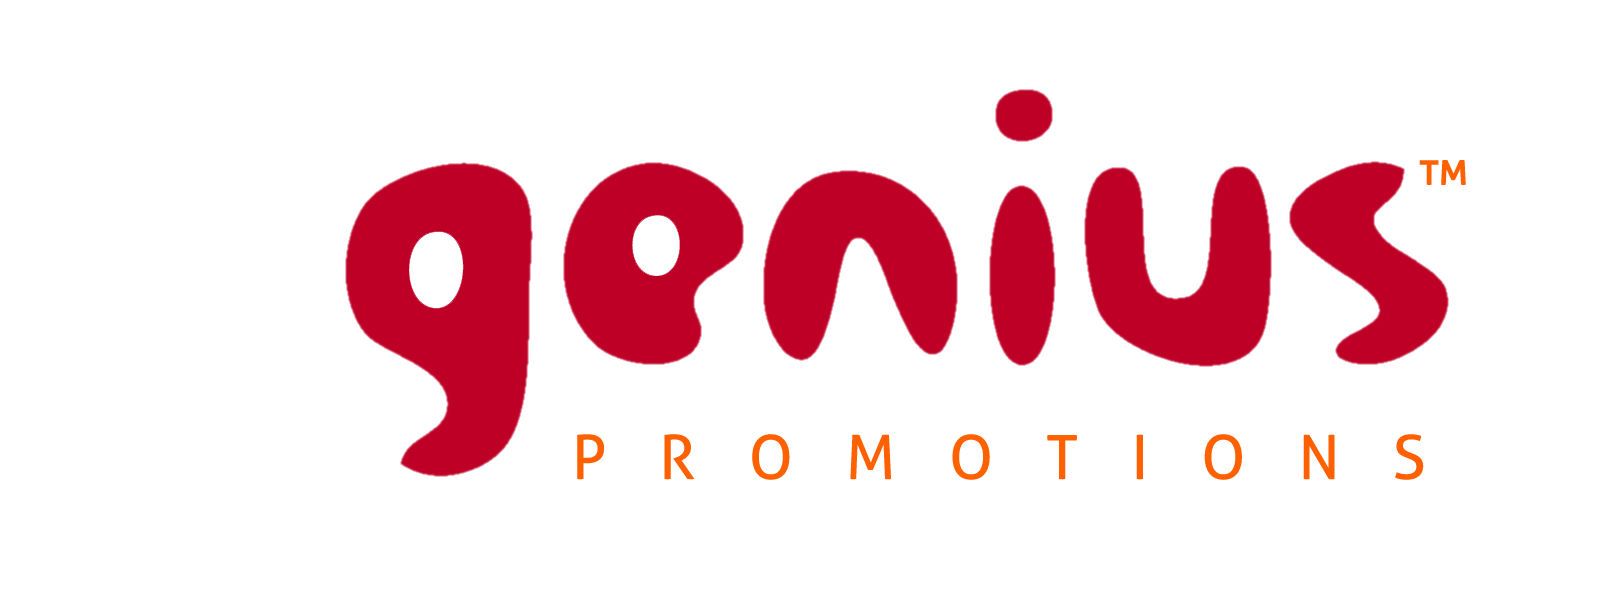 i-genius Promotions - social marketing agency Launched!